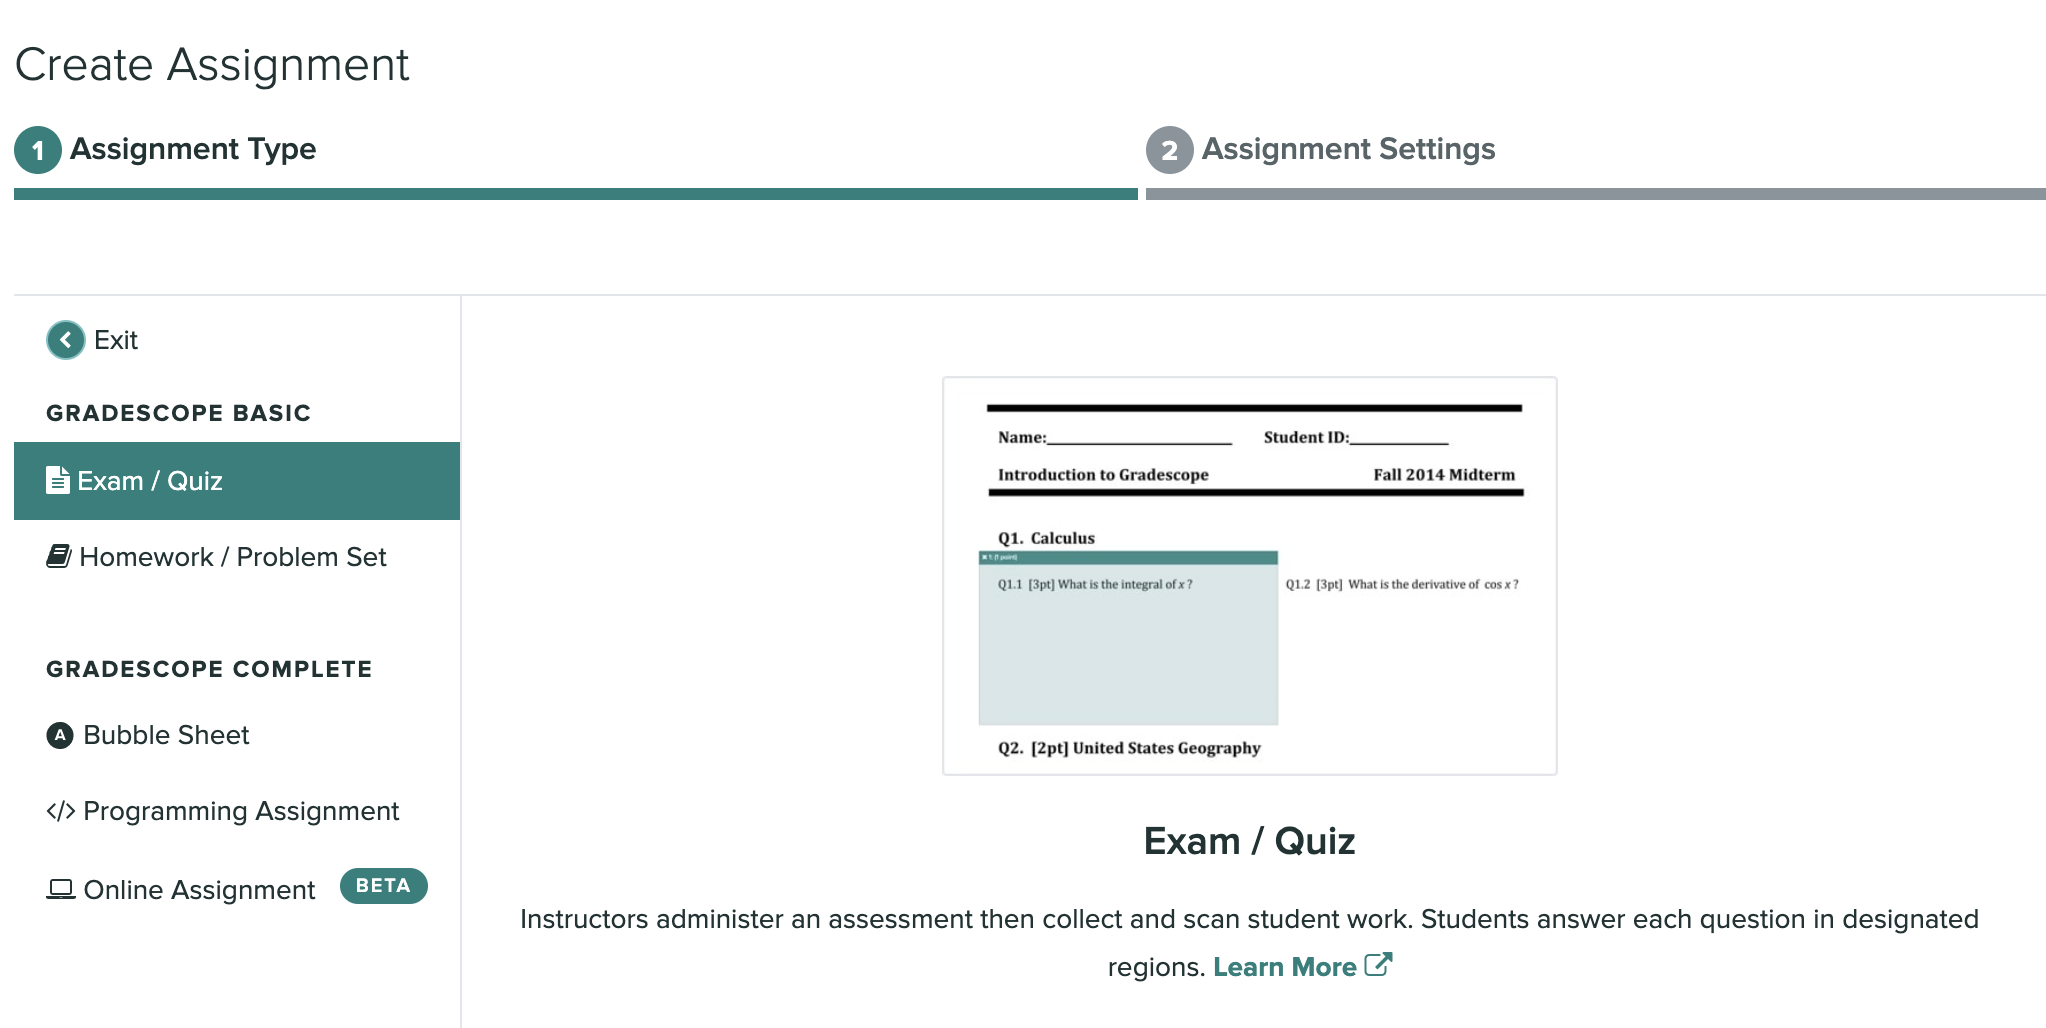 A screen capture of the Exam/Quiz assignment type selected on the Create Assignment page.